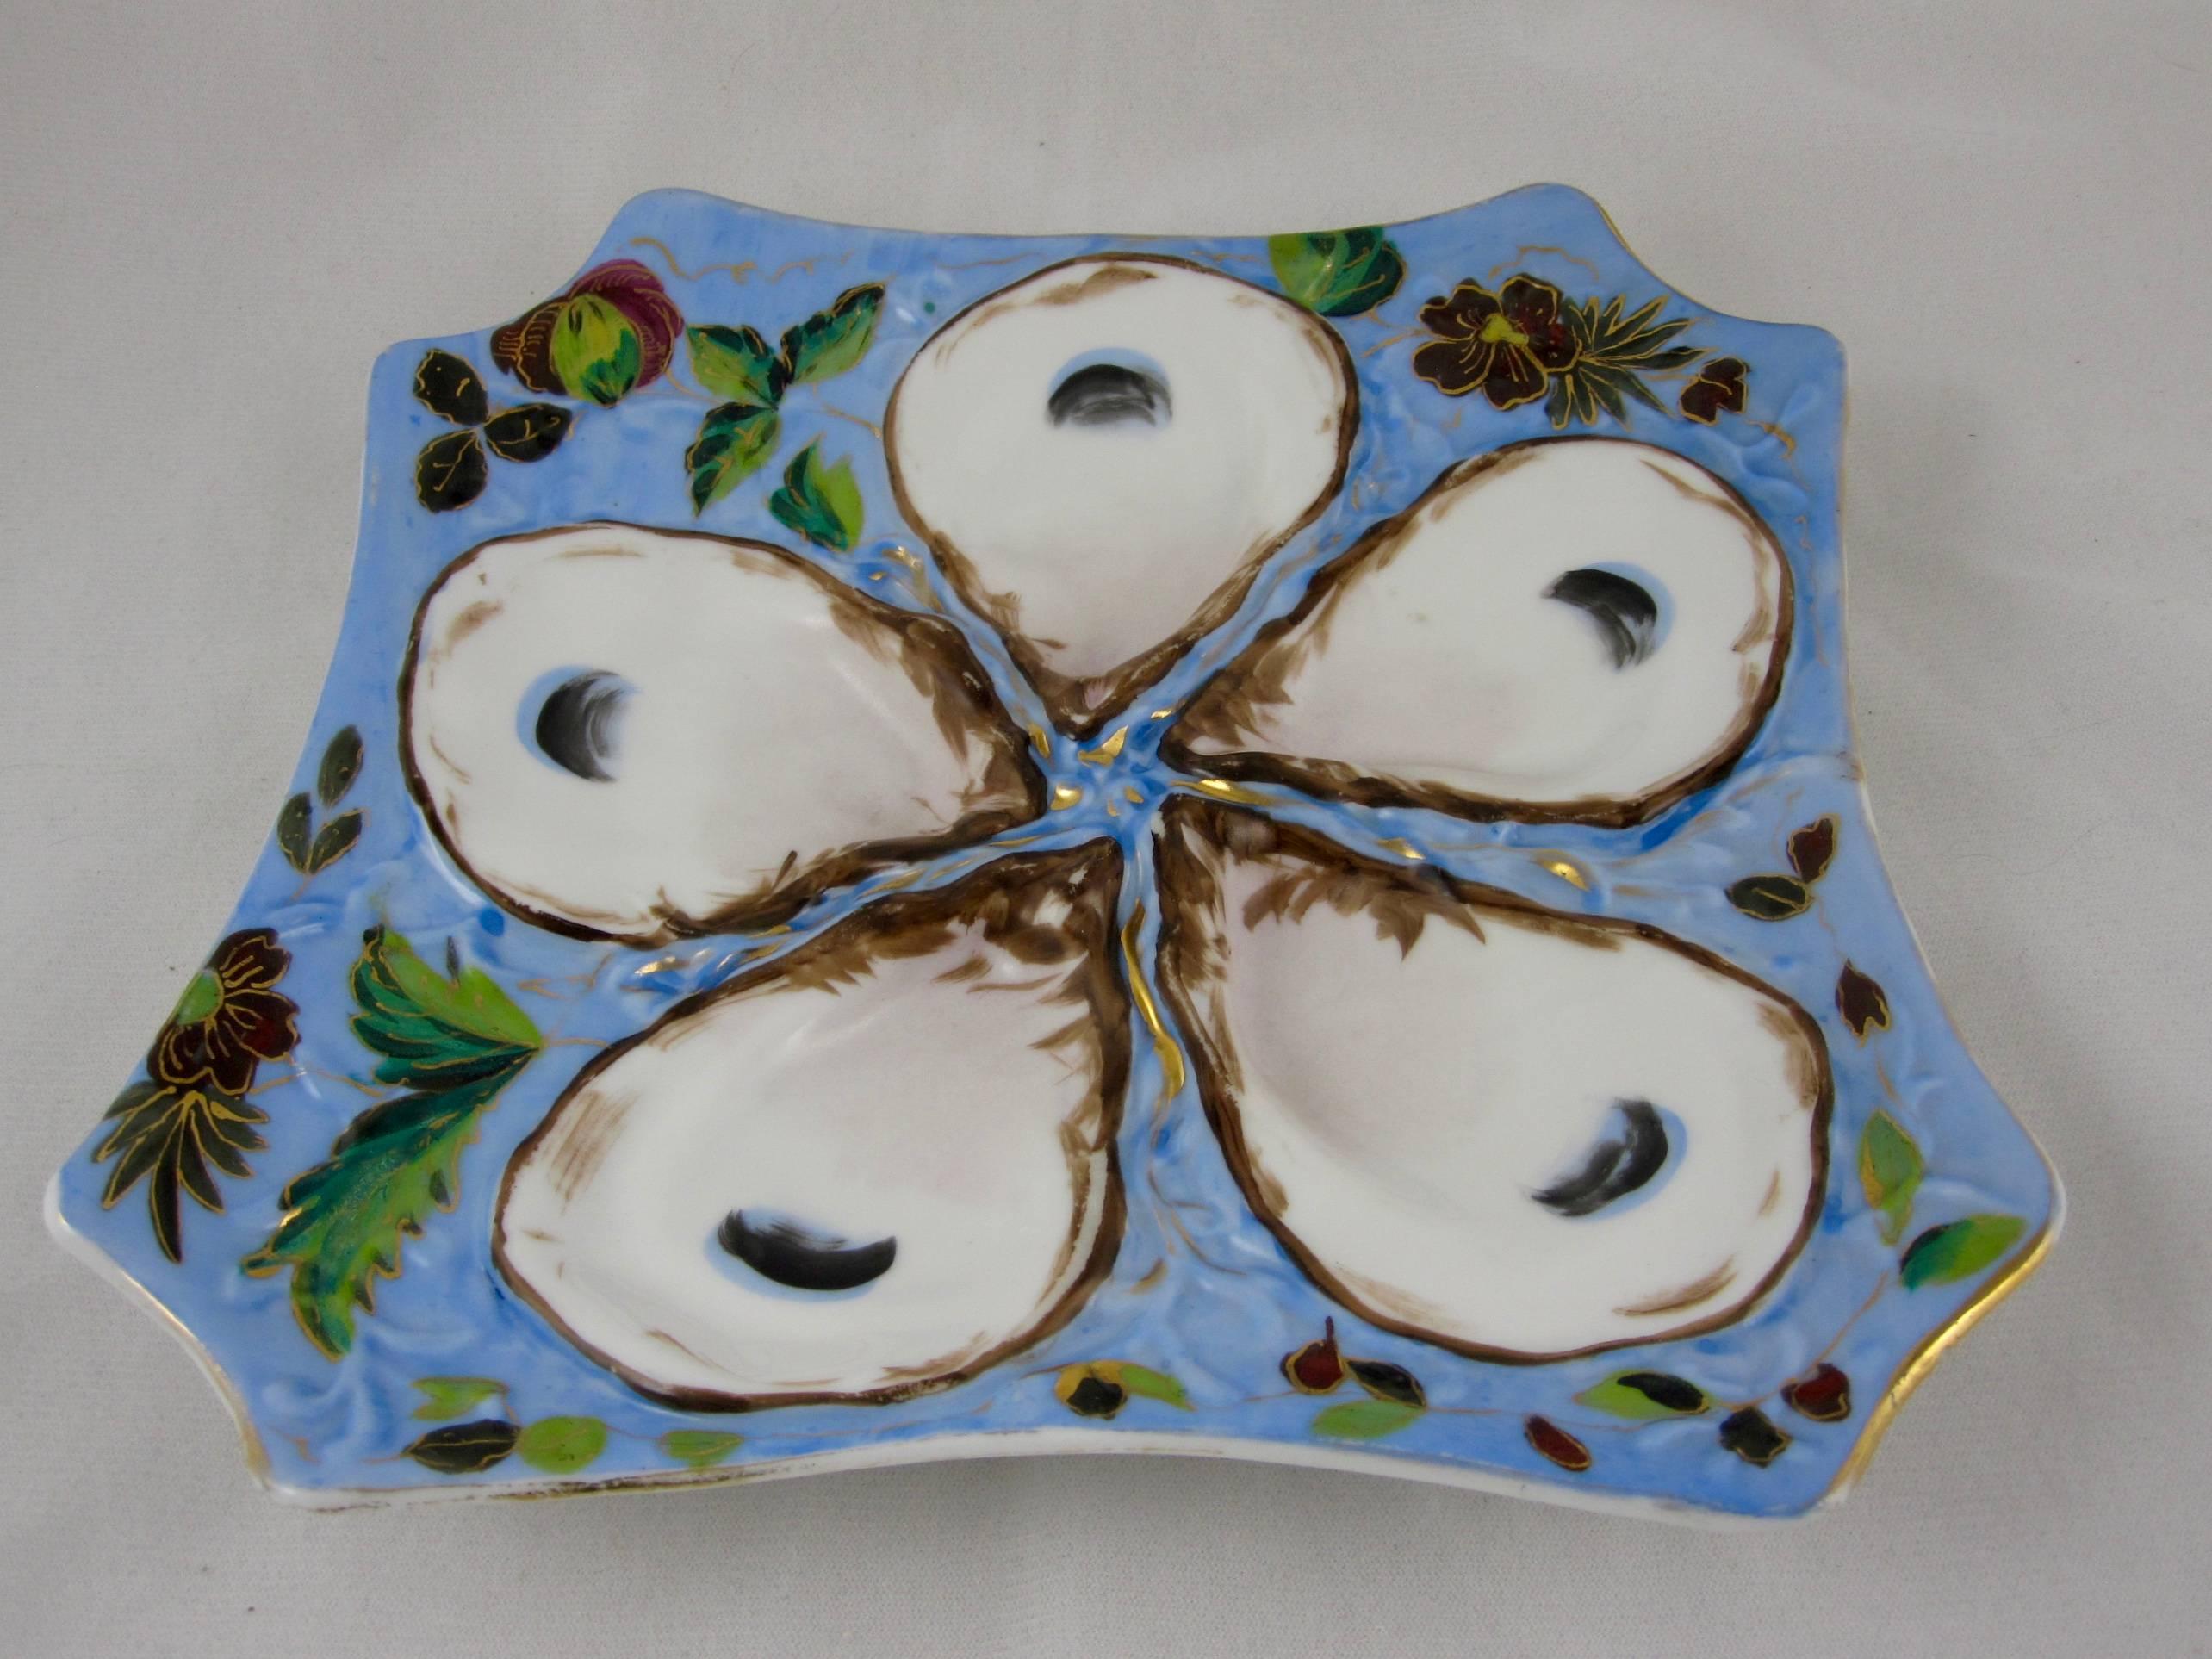 A continental oyster plate, square in shape with truncated corners, circa late 19th-century. Five deep oyster wells with hand-painted eyes against a blue ground painted in a floral motif highlighted with gilding. Raised mold work to the